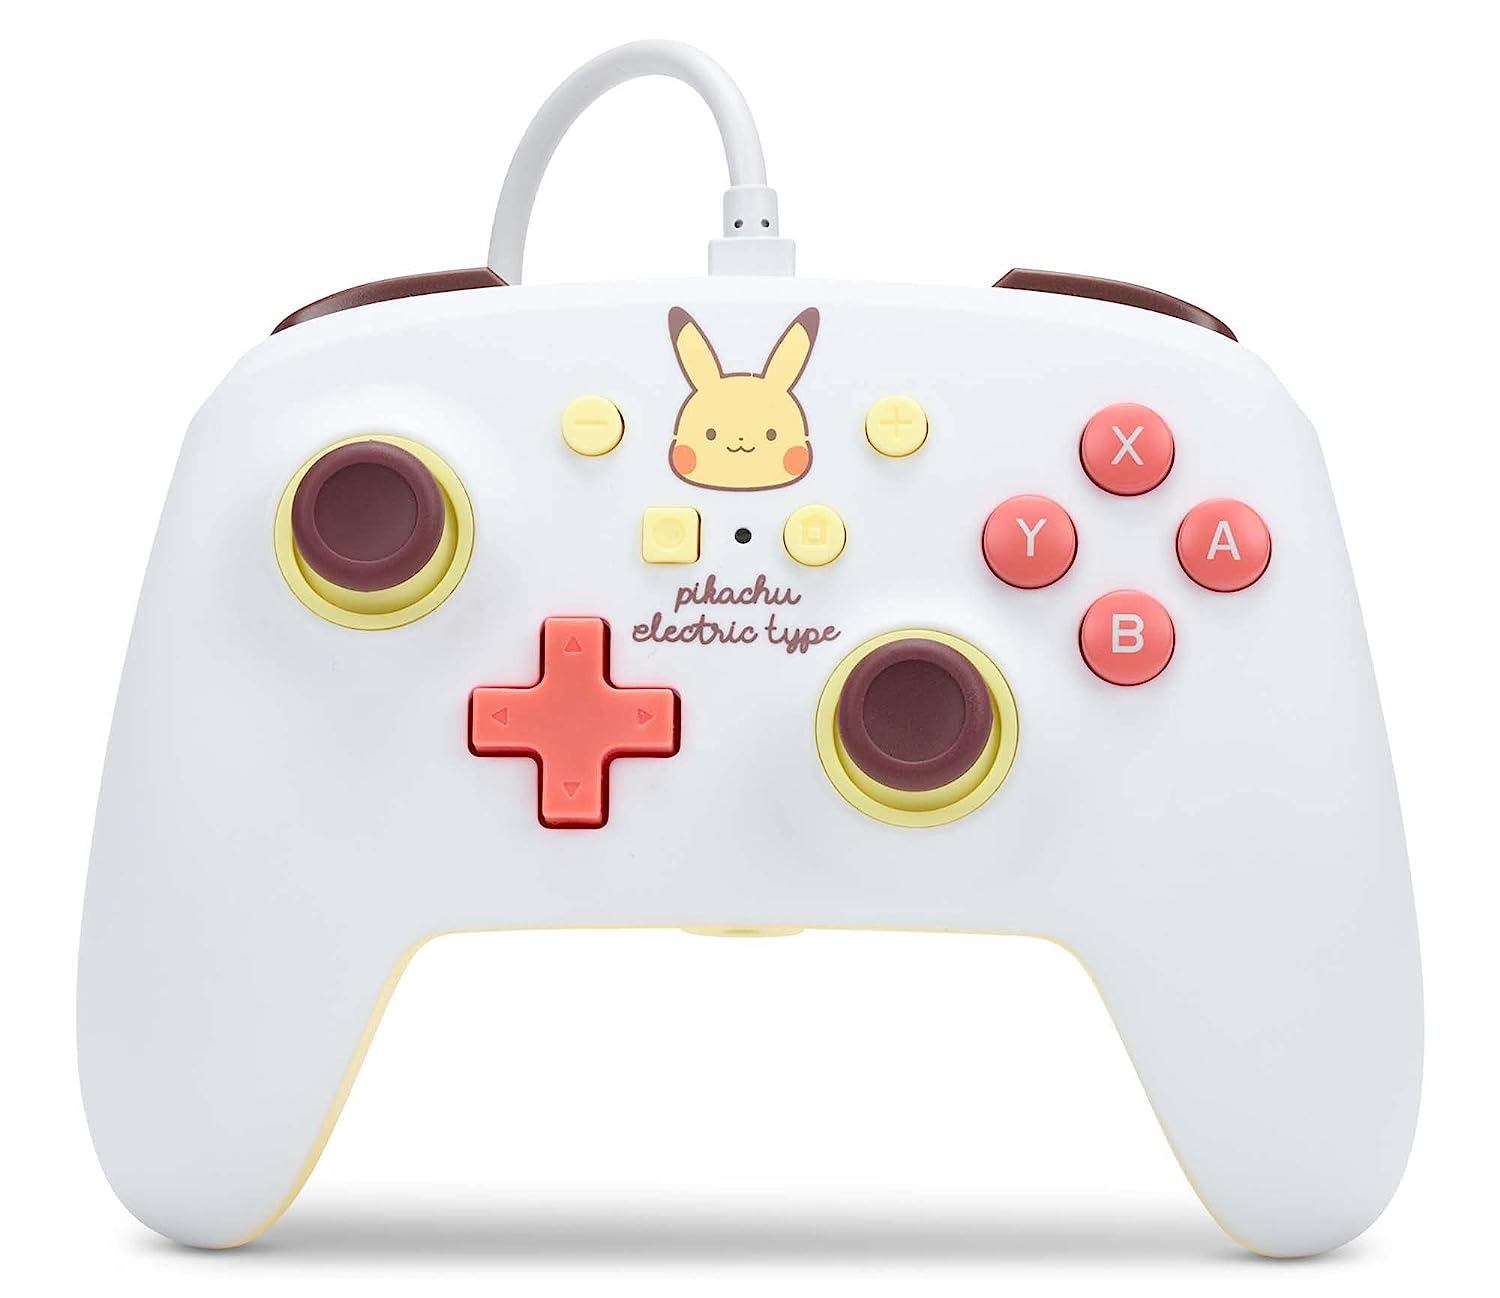 PowerA Enhanced Wired Controller for Nintendo Switch (Pikachu Electric) $12 + Free Shipping w/ Prime or on orders over $35